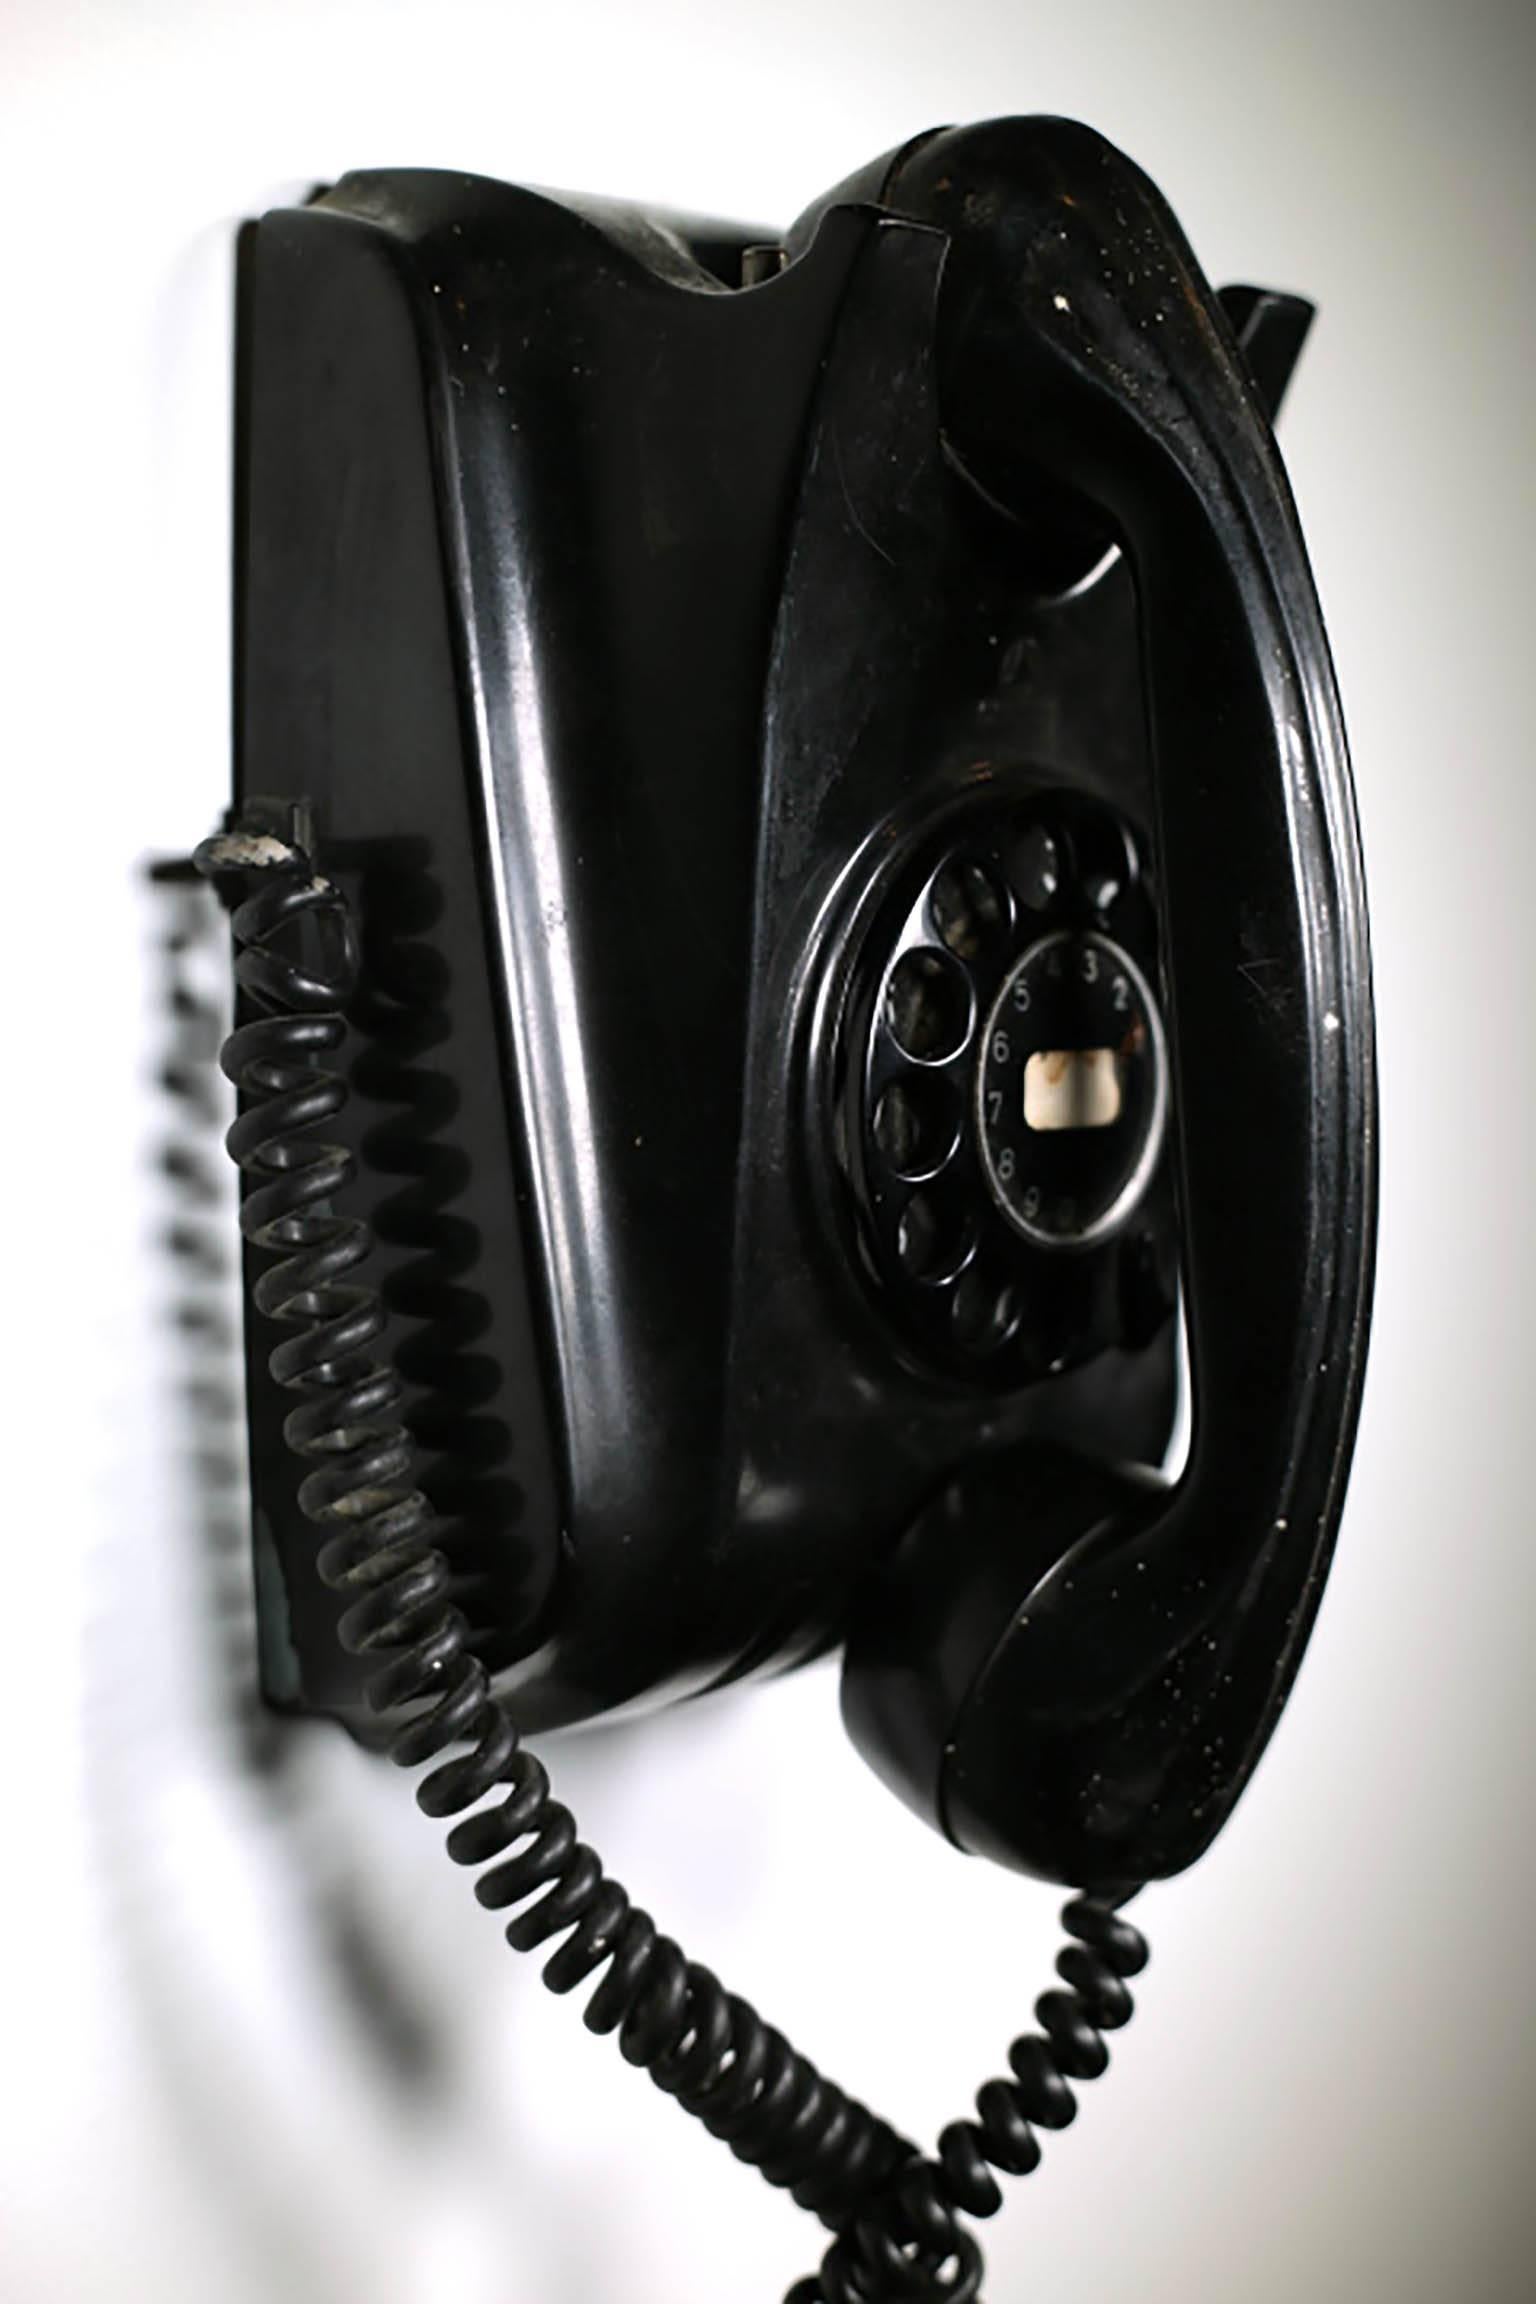 All bakelite telephone from The Netherlands, circa 1950s. The dial works properly. The phone might work if hooked up.